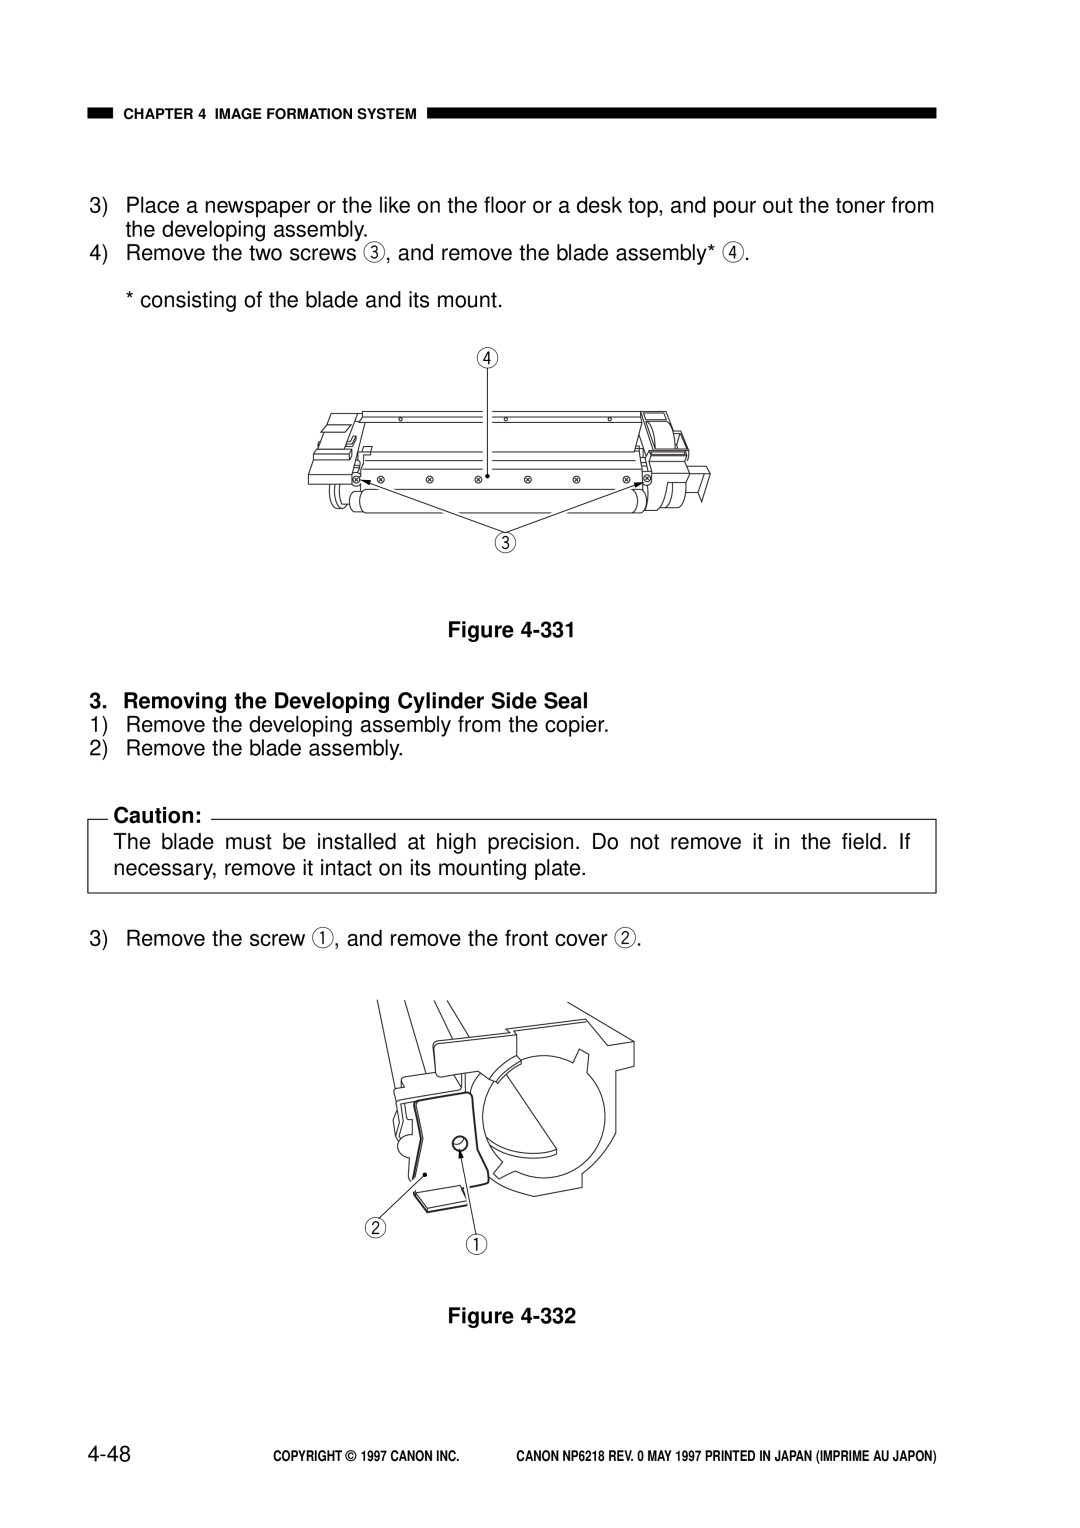 Canon NP6218, FY8-13EX-000 service manual Removing the Developing Cylinder Side Seal, 4-48 